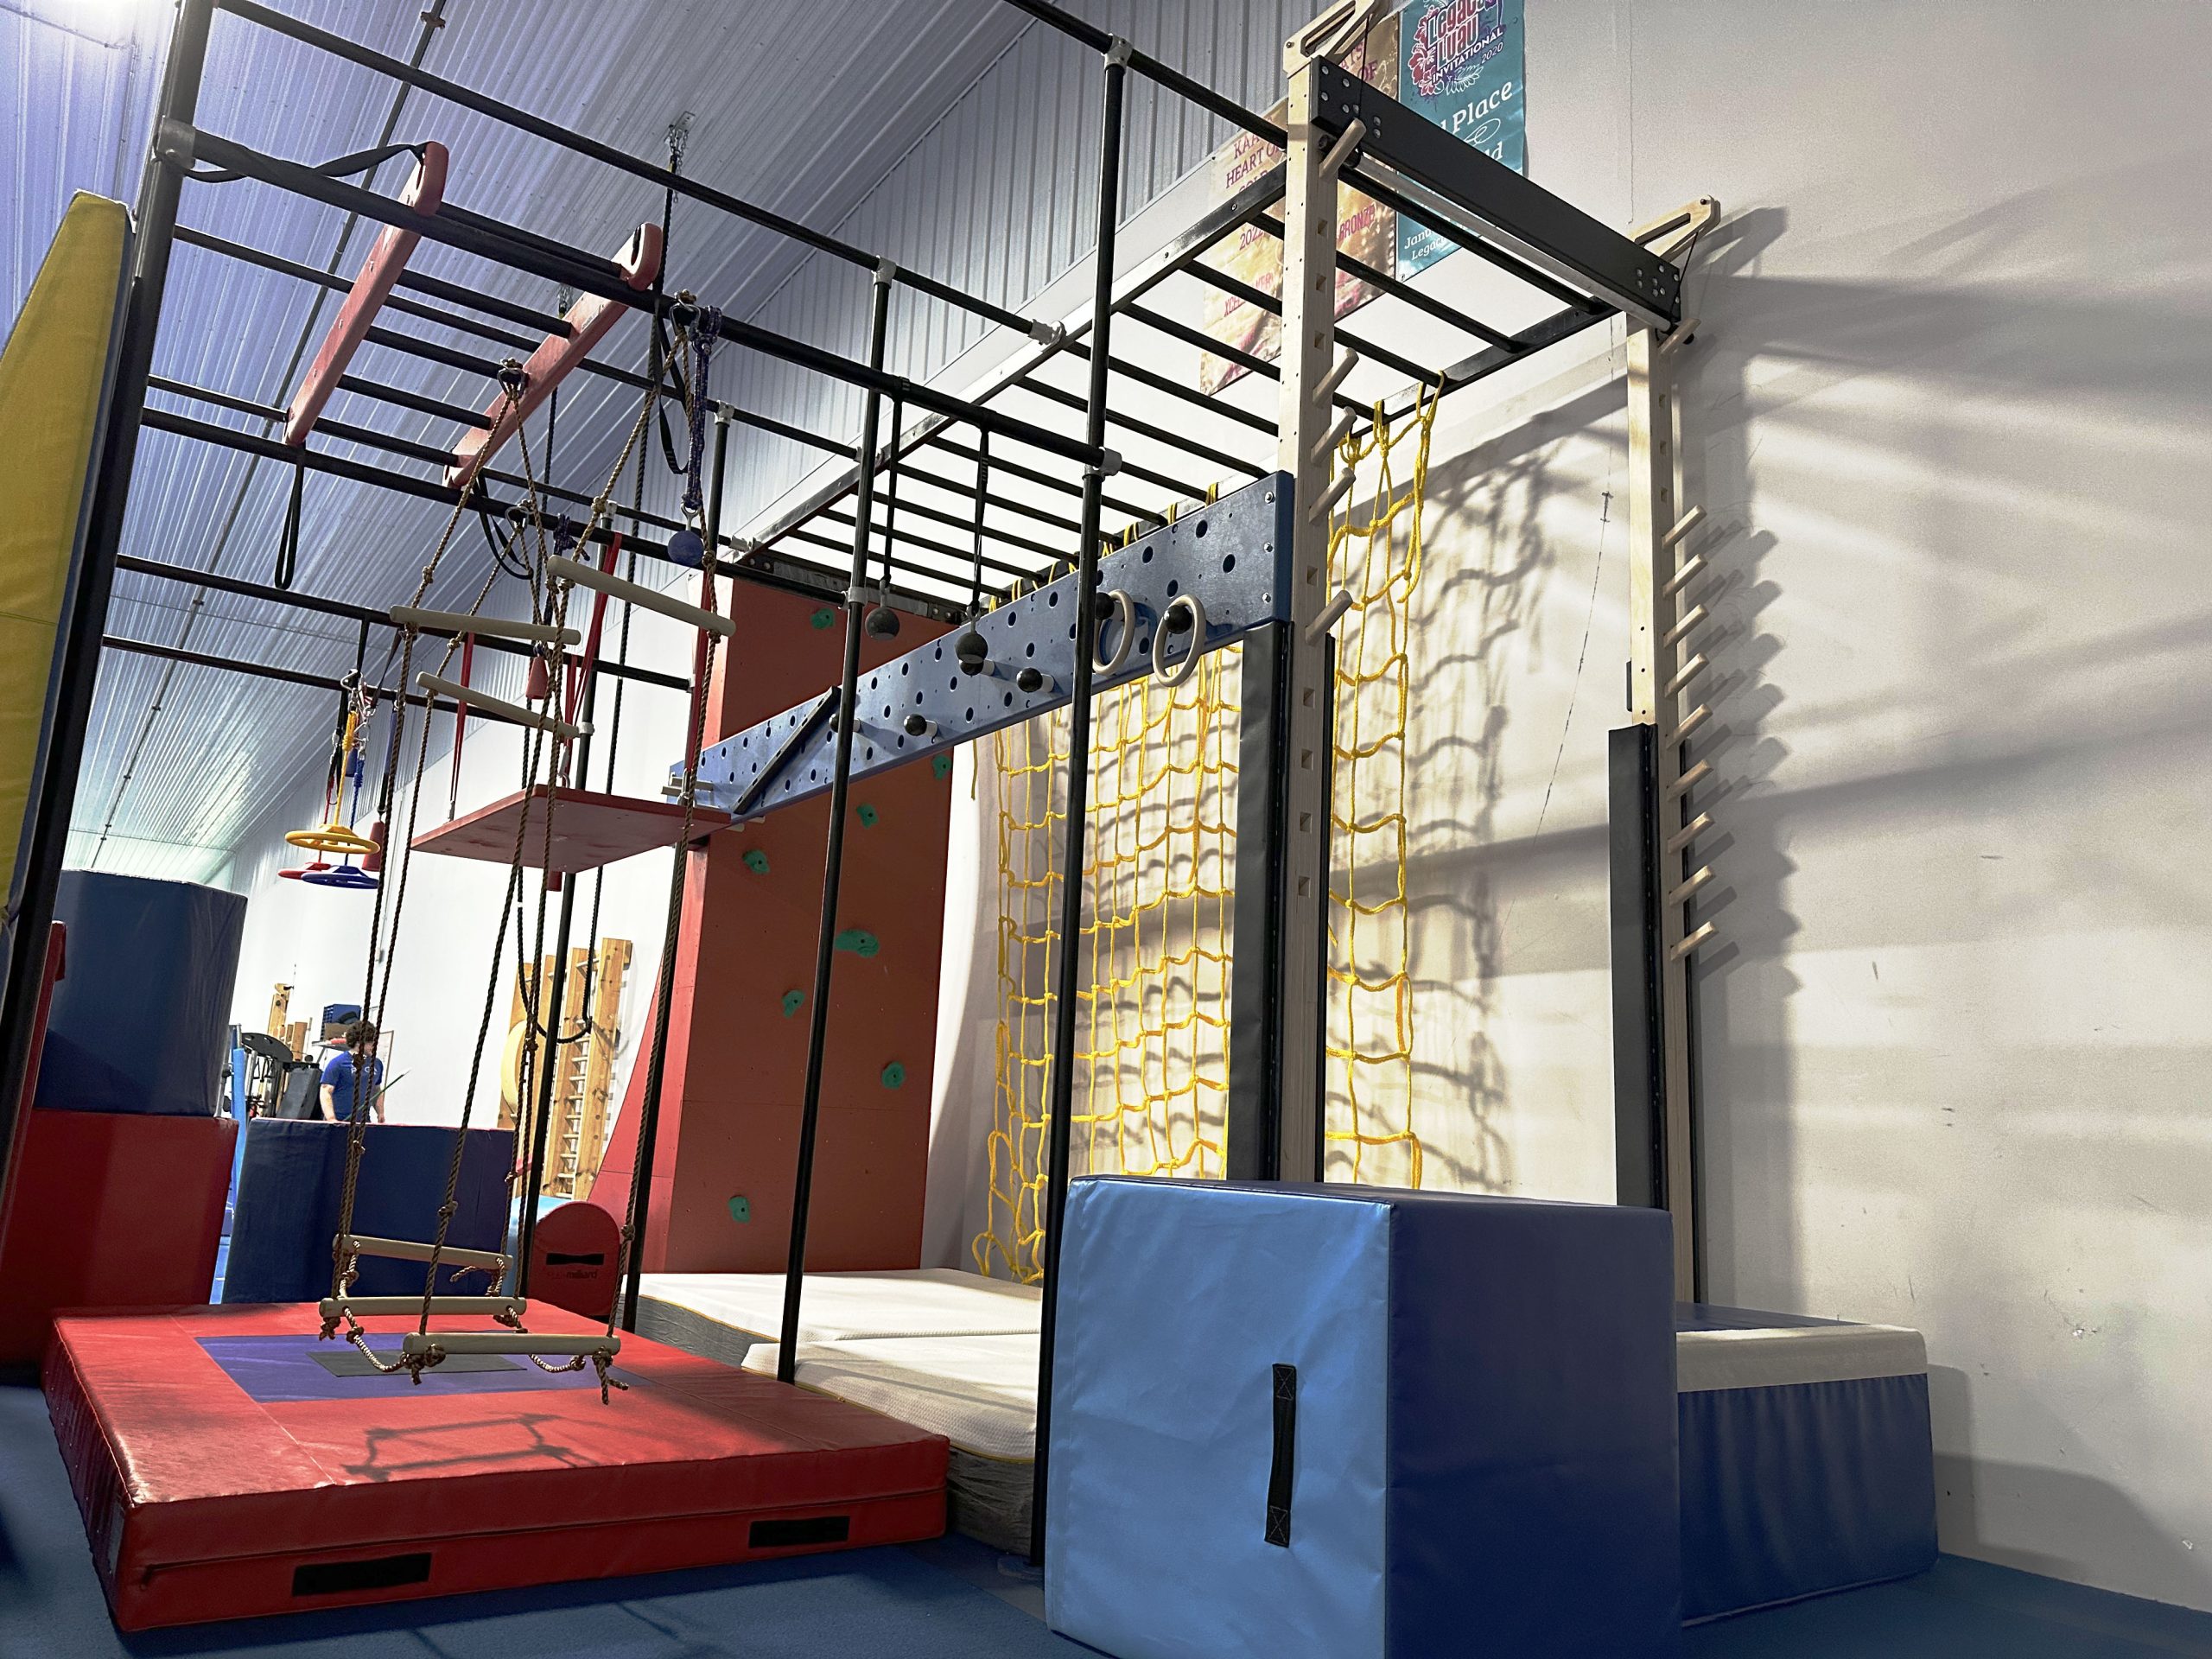 Obstacles in the Ninja Parkour area at ROGA